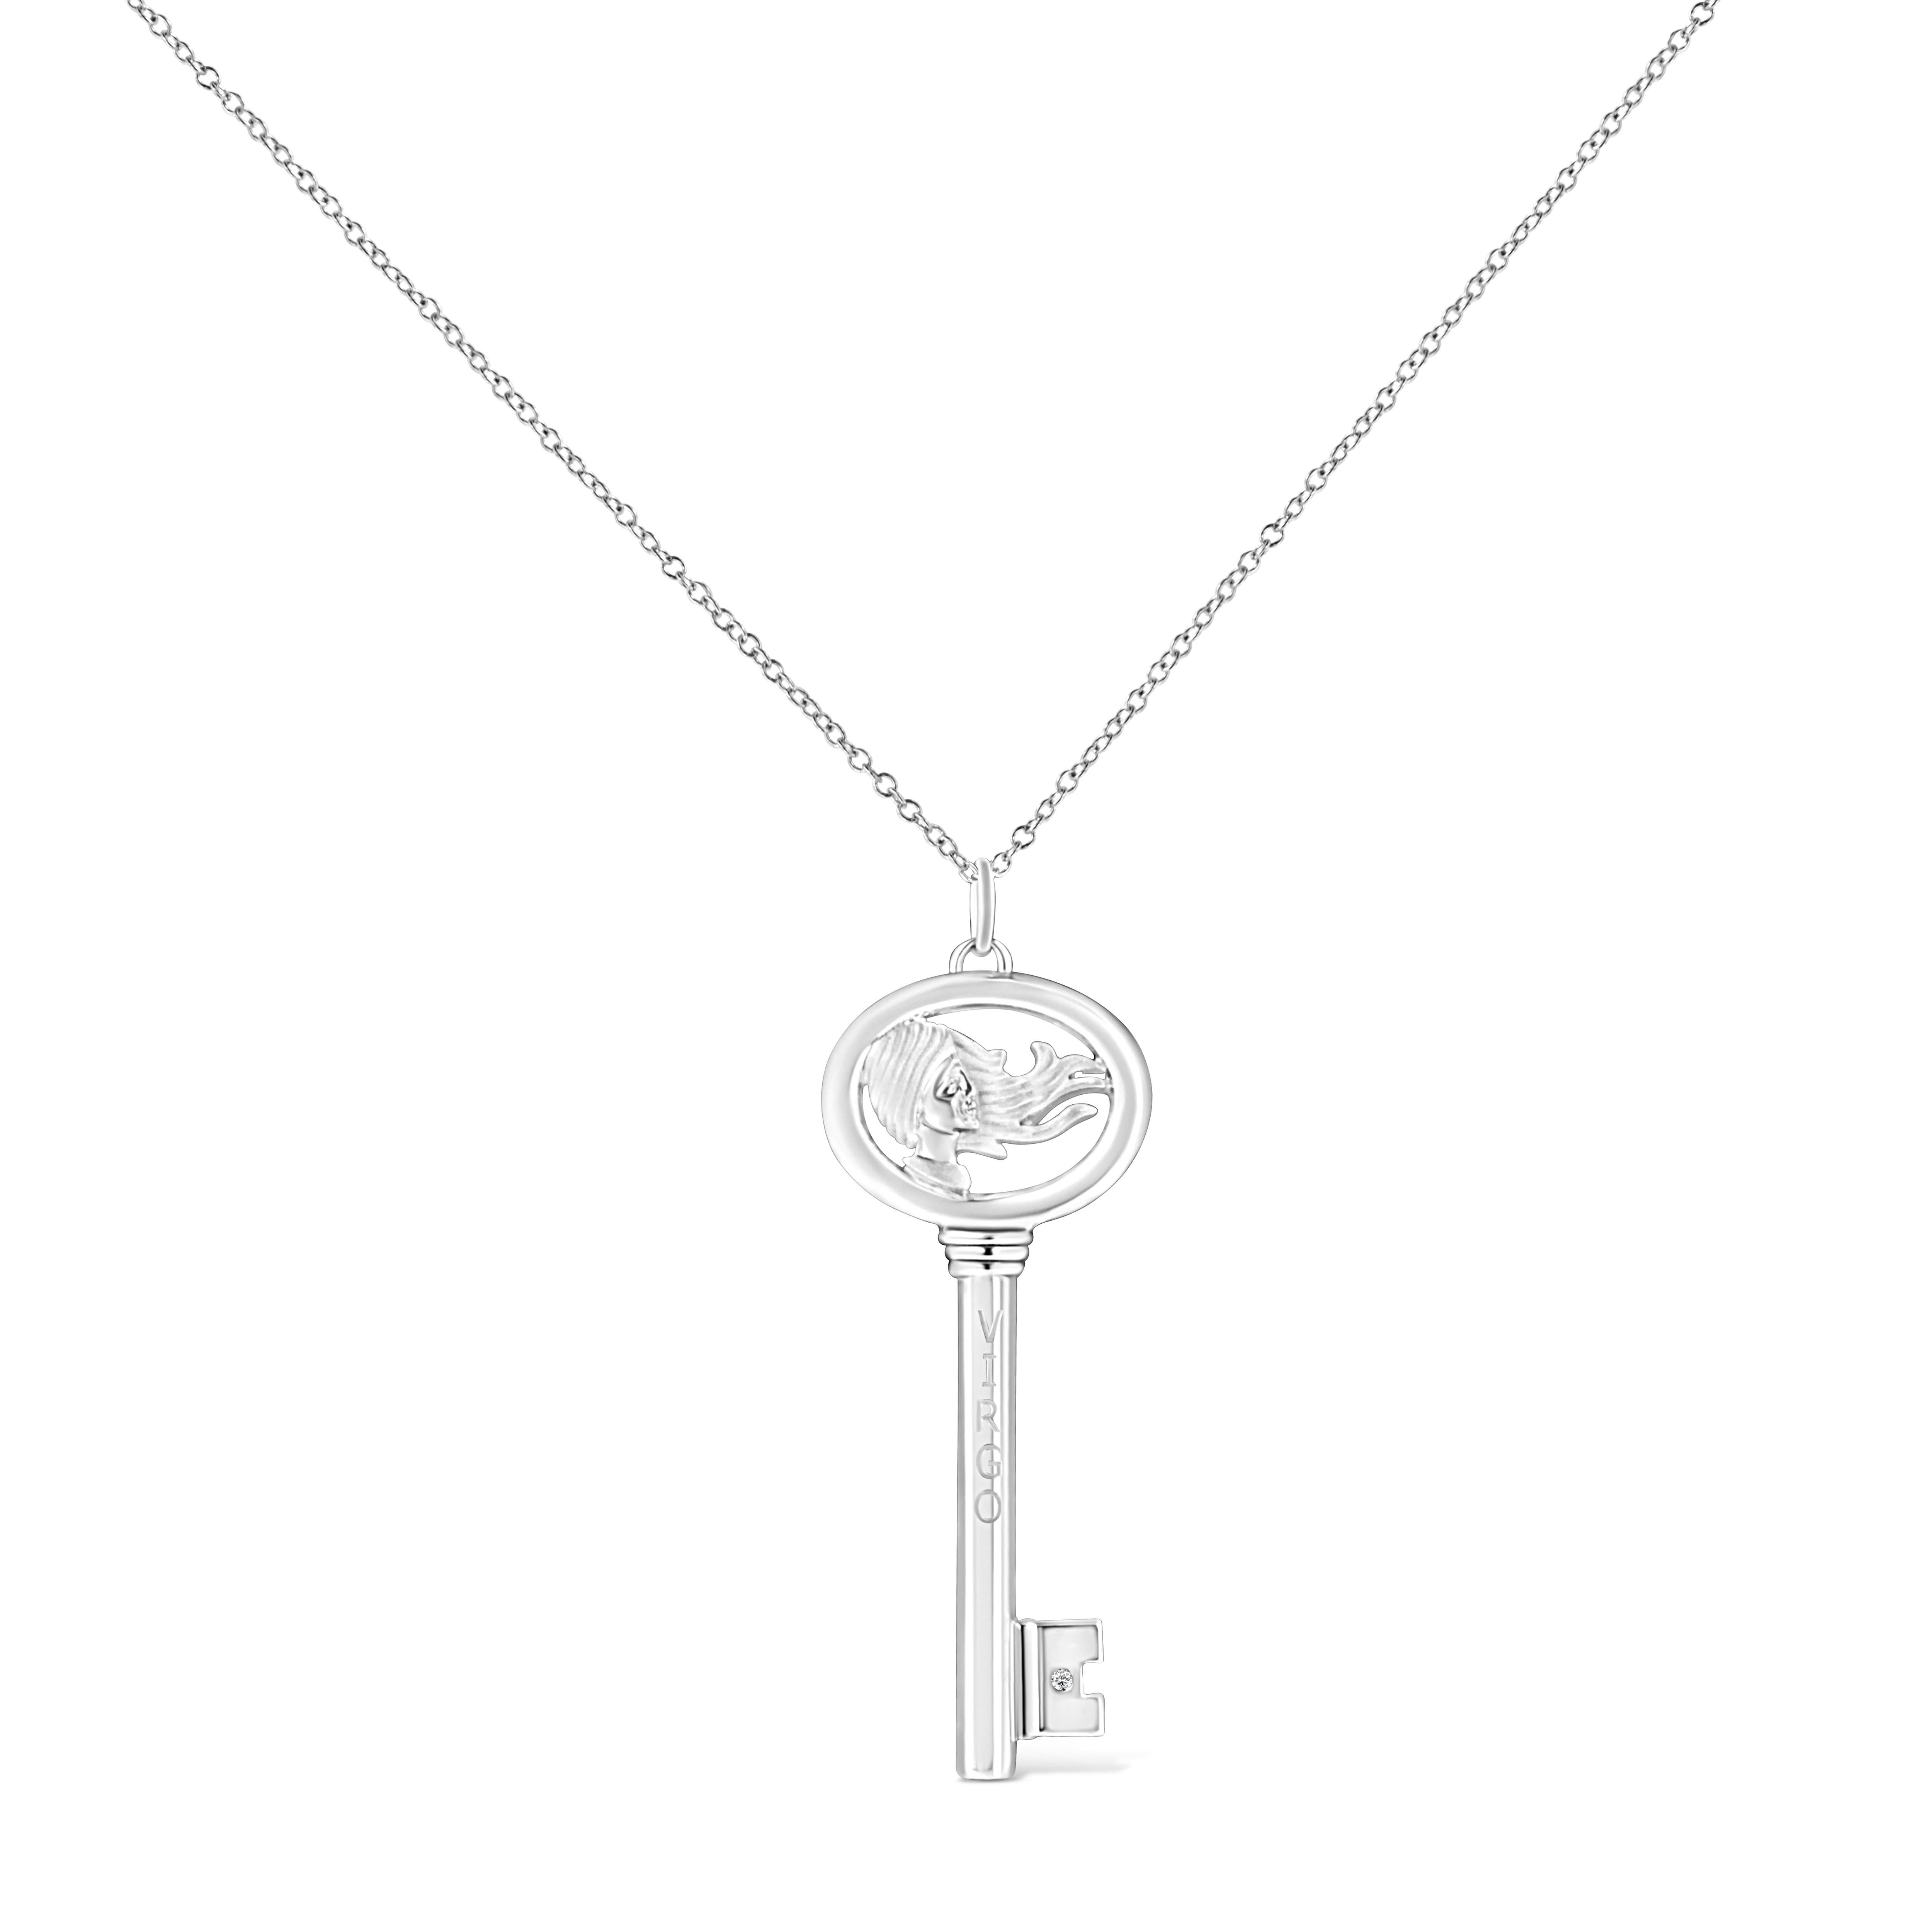 It's as if the stars aligned to create this stunning .925 Sterling Silver necklace flaunting a Virgo zodiac pendant accented by a glimmering bezel set natural diamond. Brilliant beacons of optimism and hope, our Zodiac Keys are radiant symbols of a